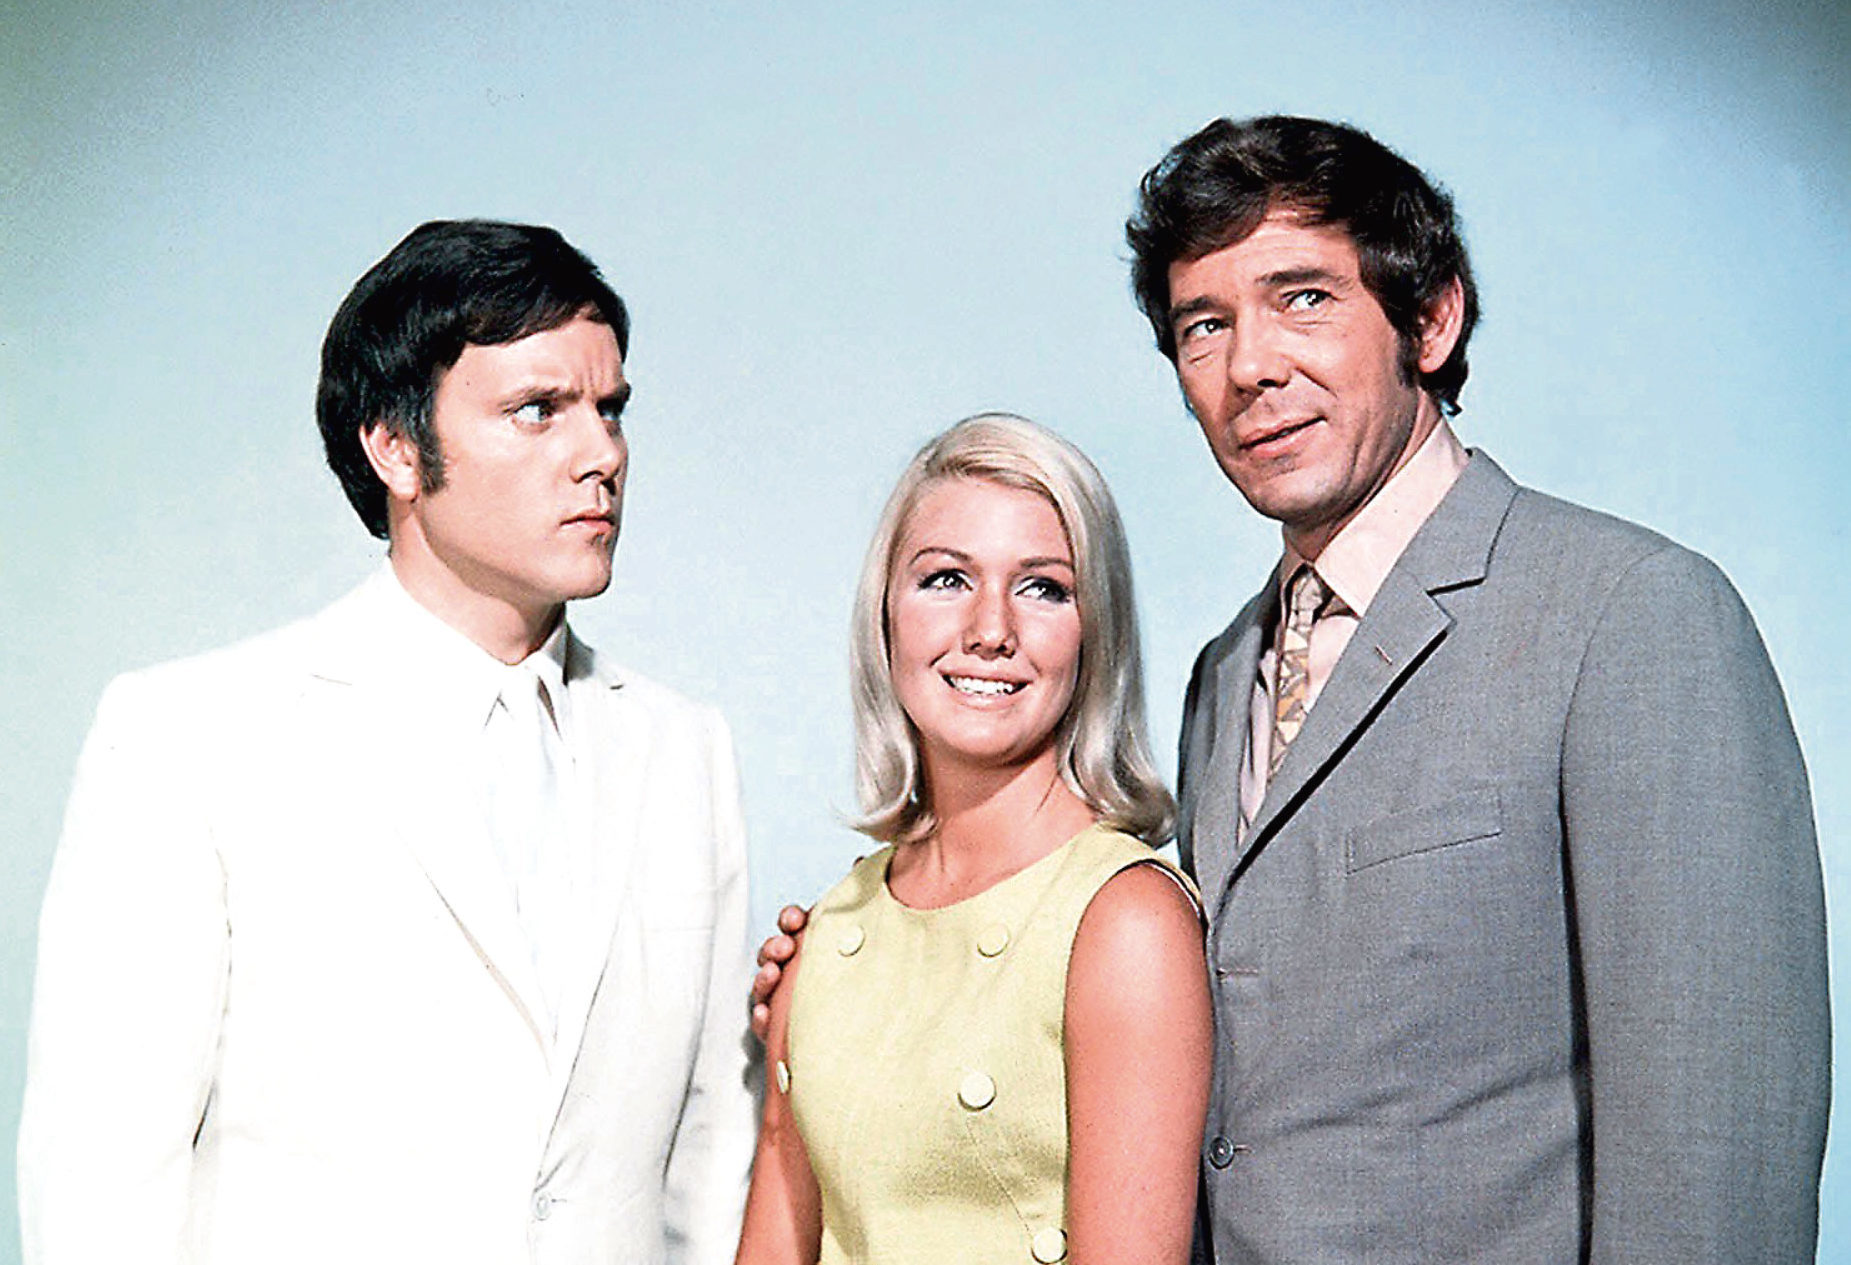 Annette with her co-stars Kenneth Cope and Mike Pratt (ITV)